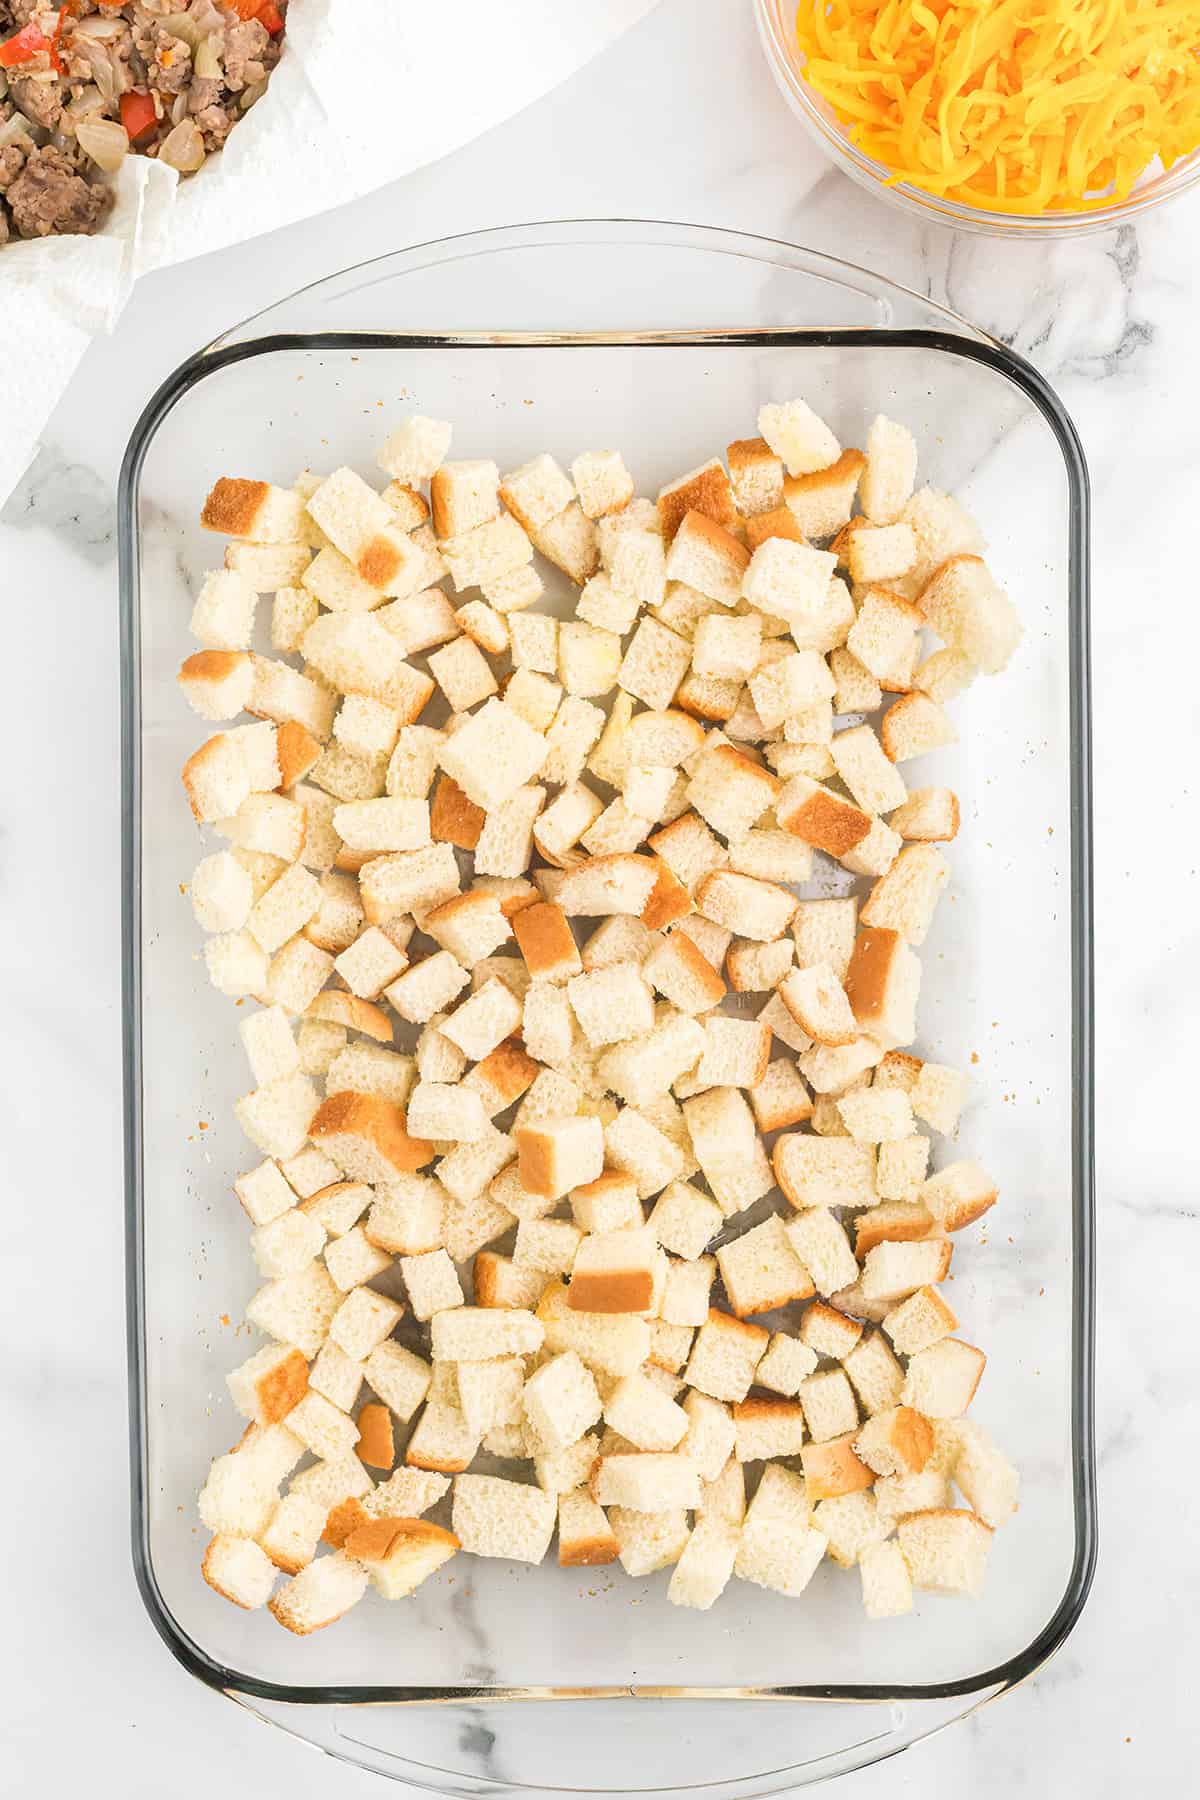 Bread cubes layered in a baking dish.